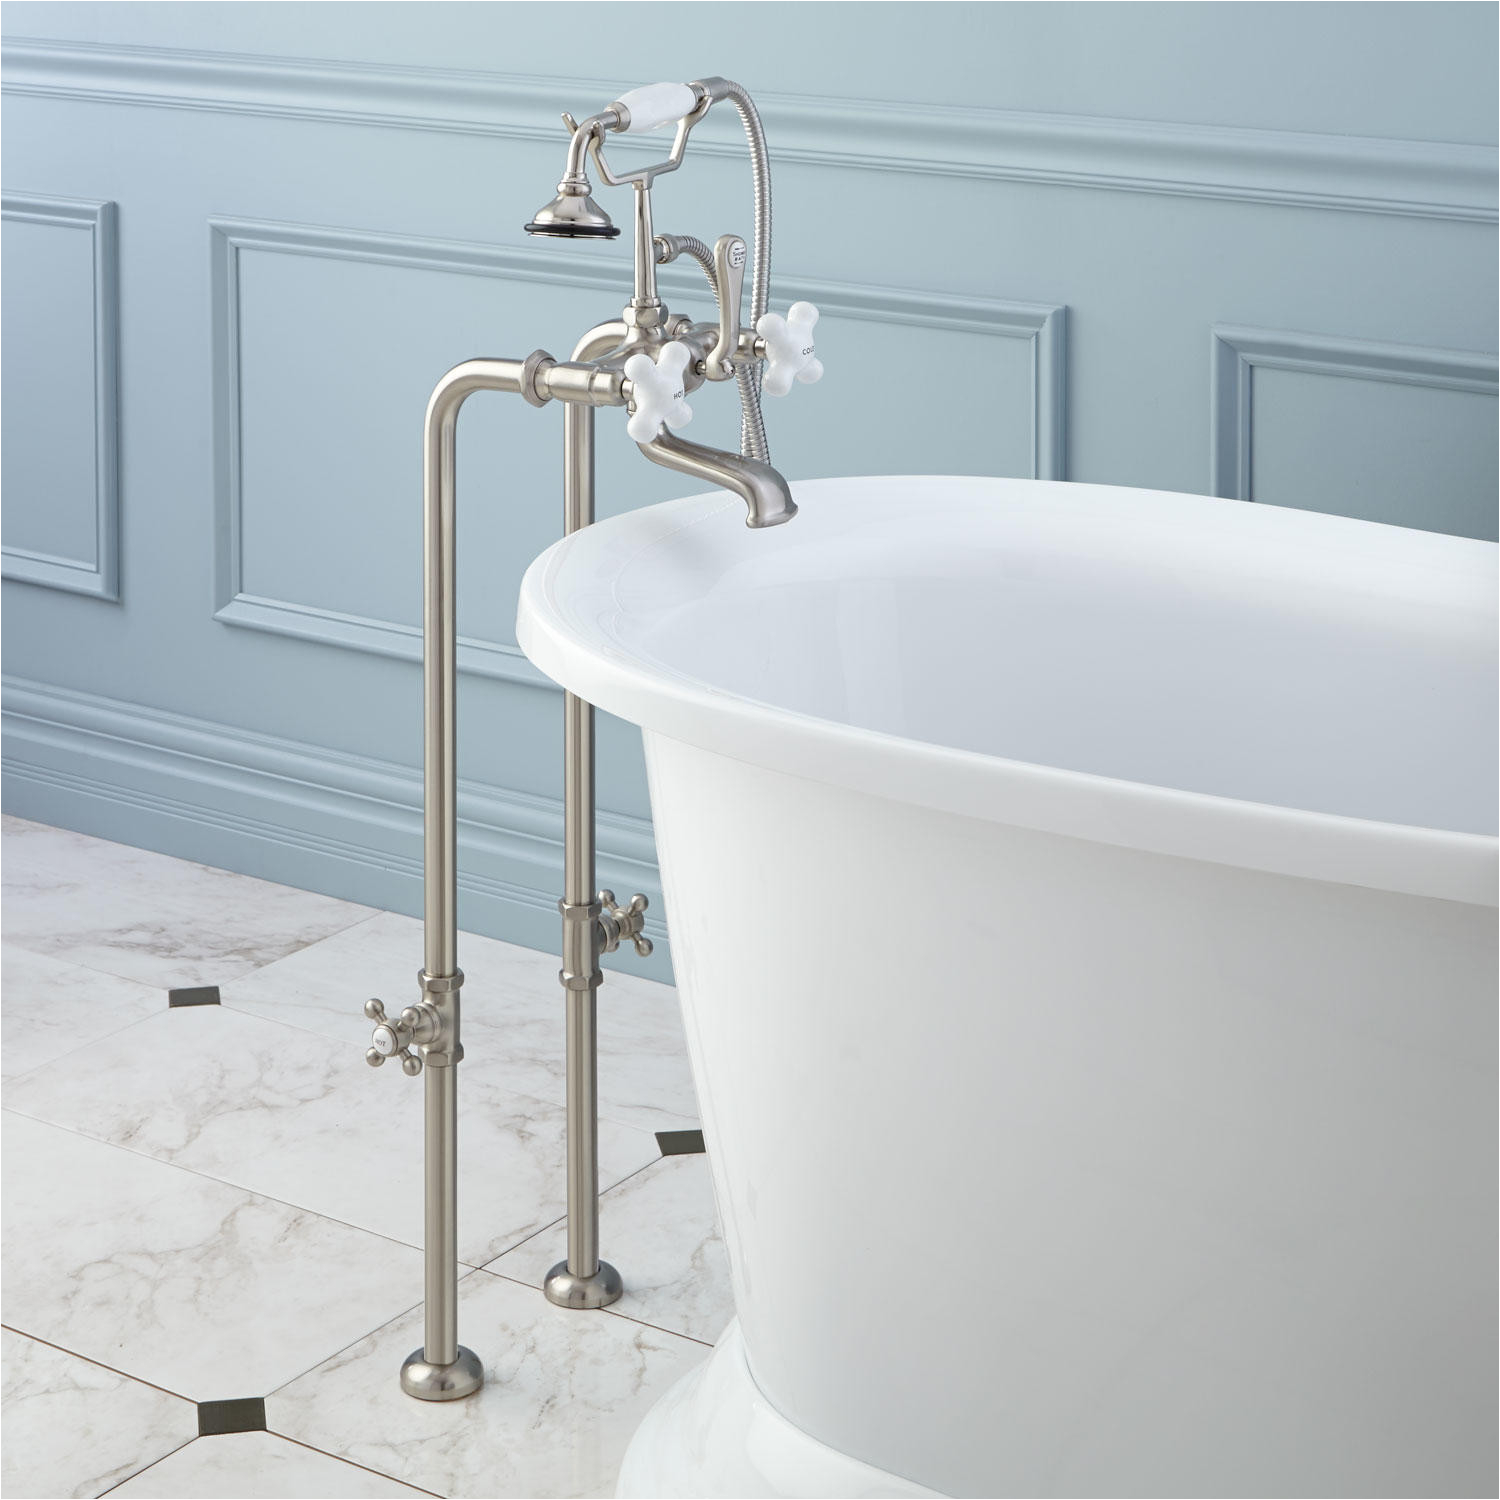 Freestanding Tub Faucet Parts Freestanding Telephone Tub Faucet Supplies and Valves